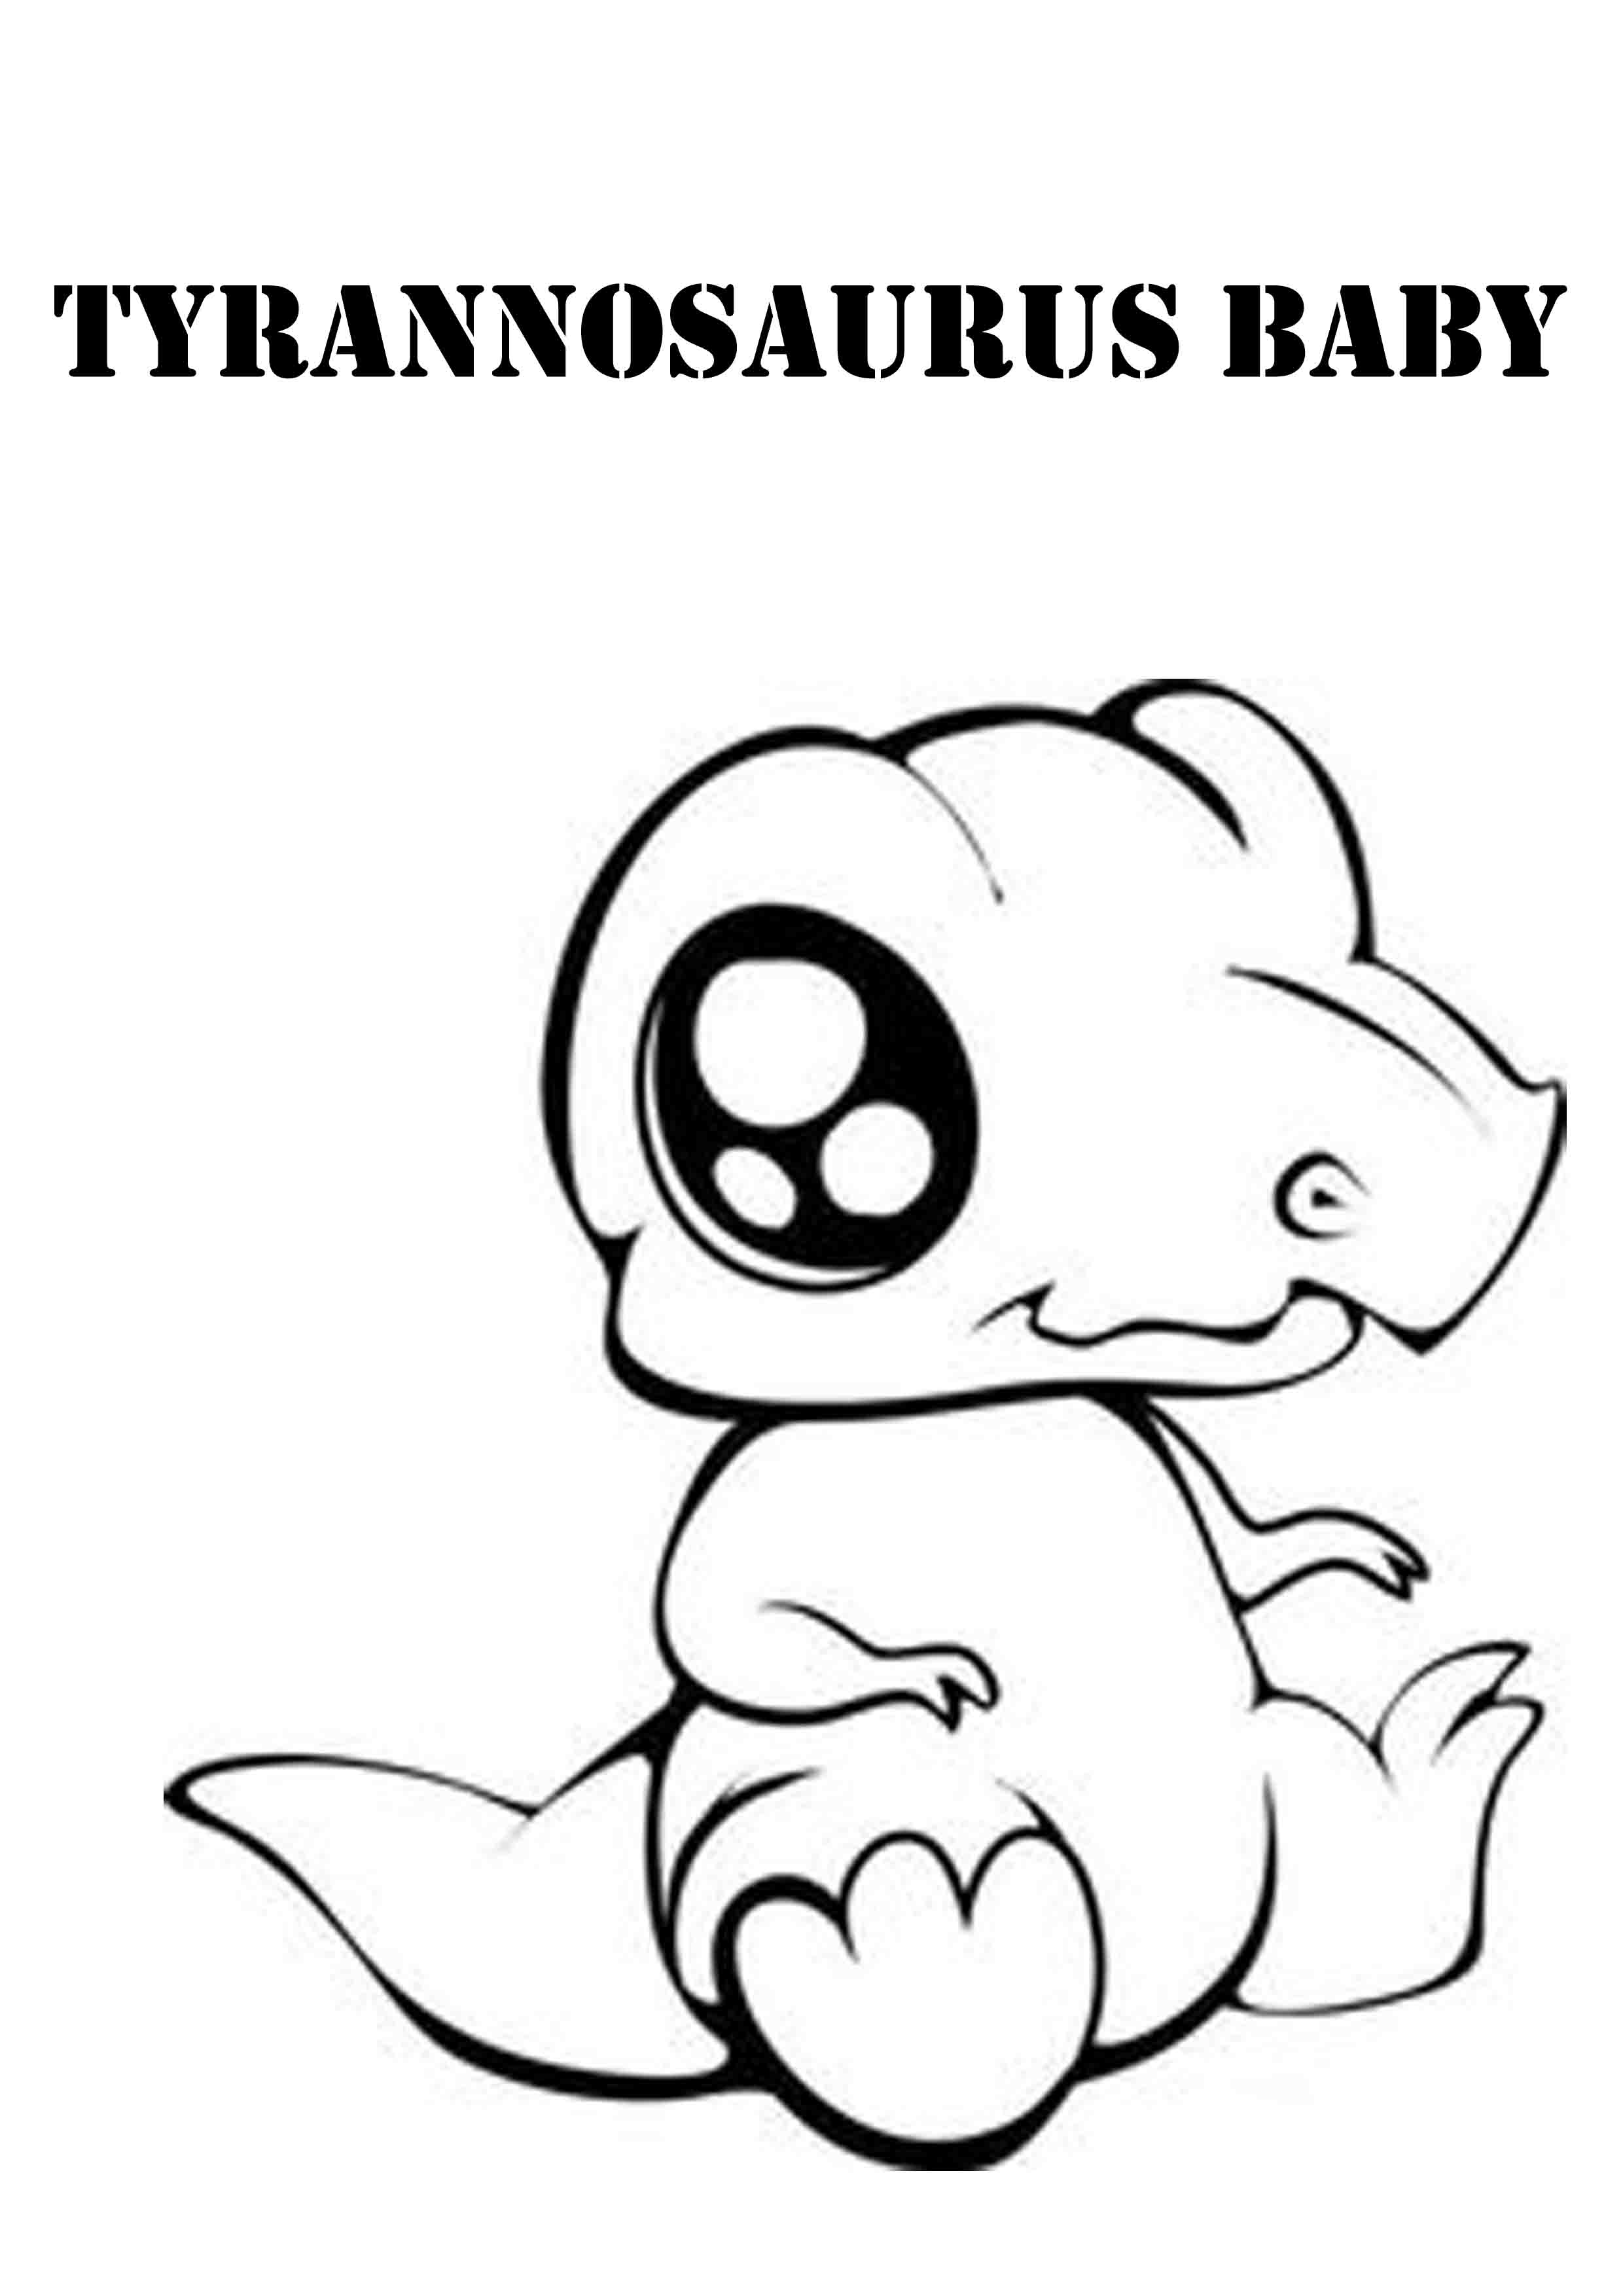 Download Dinosaur Coloring Pages for Kids